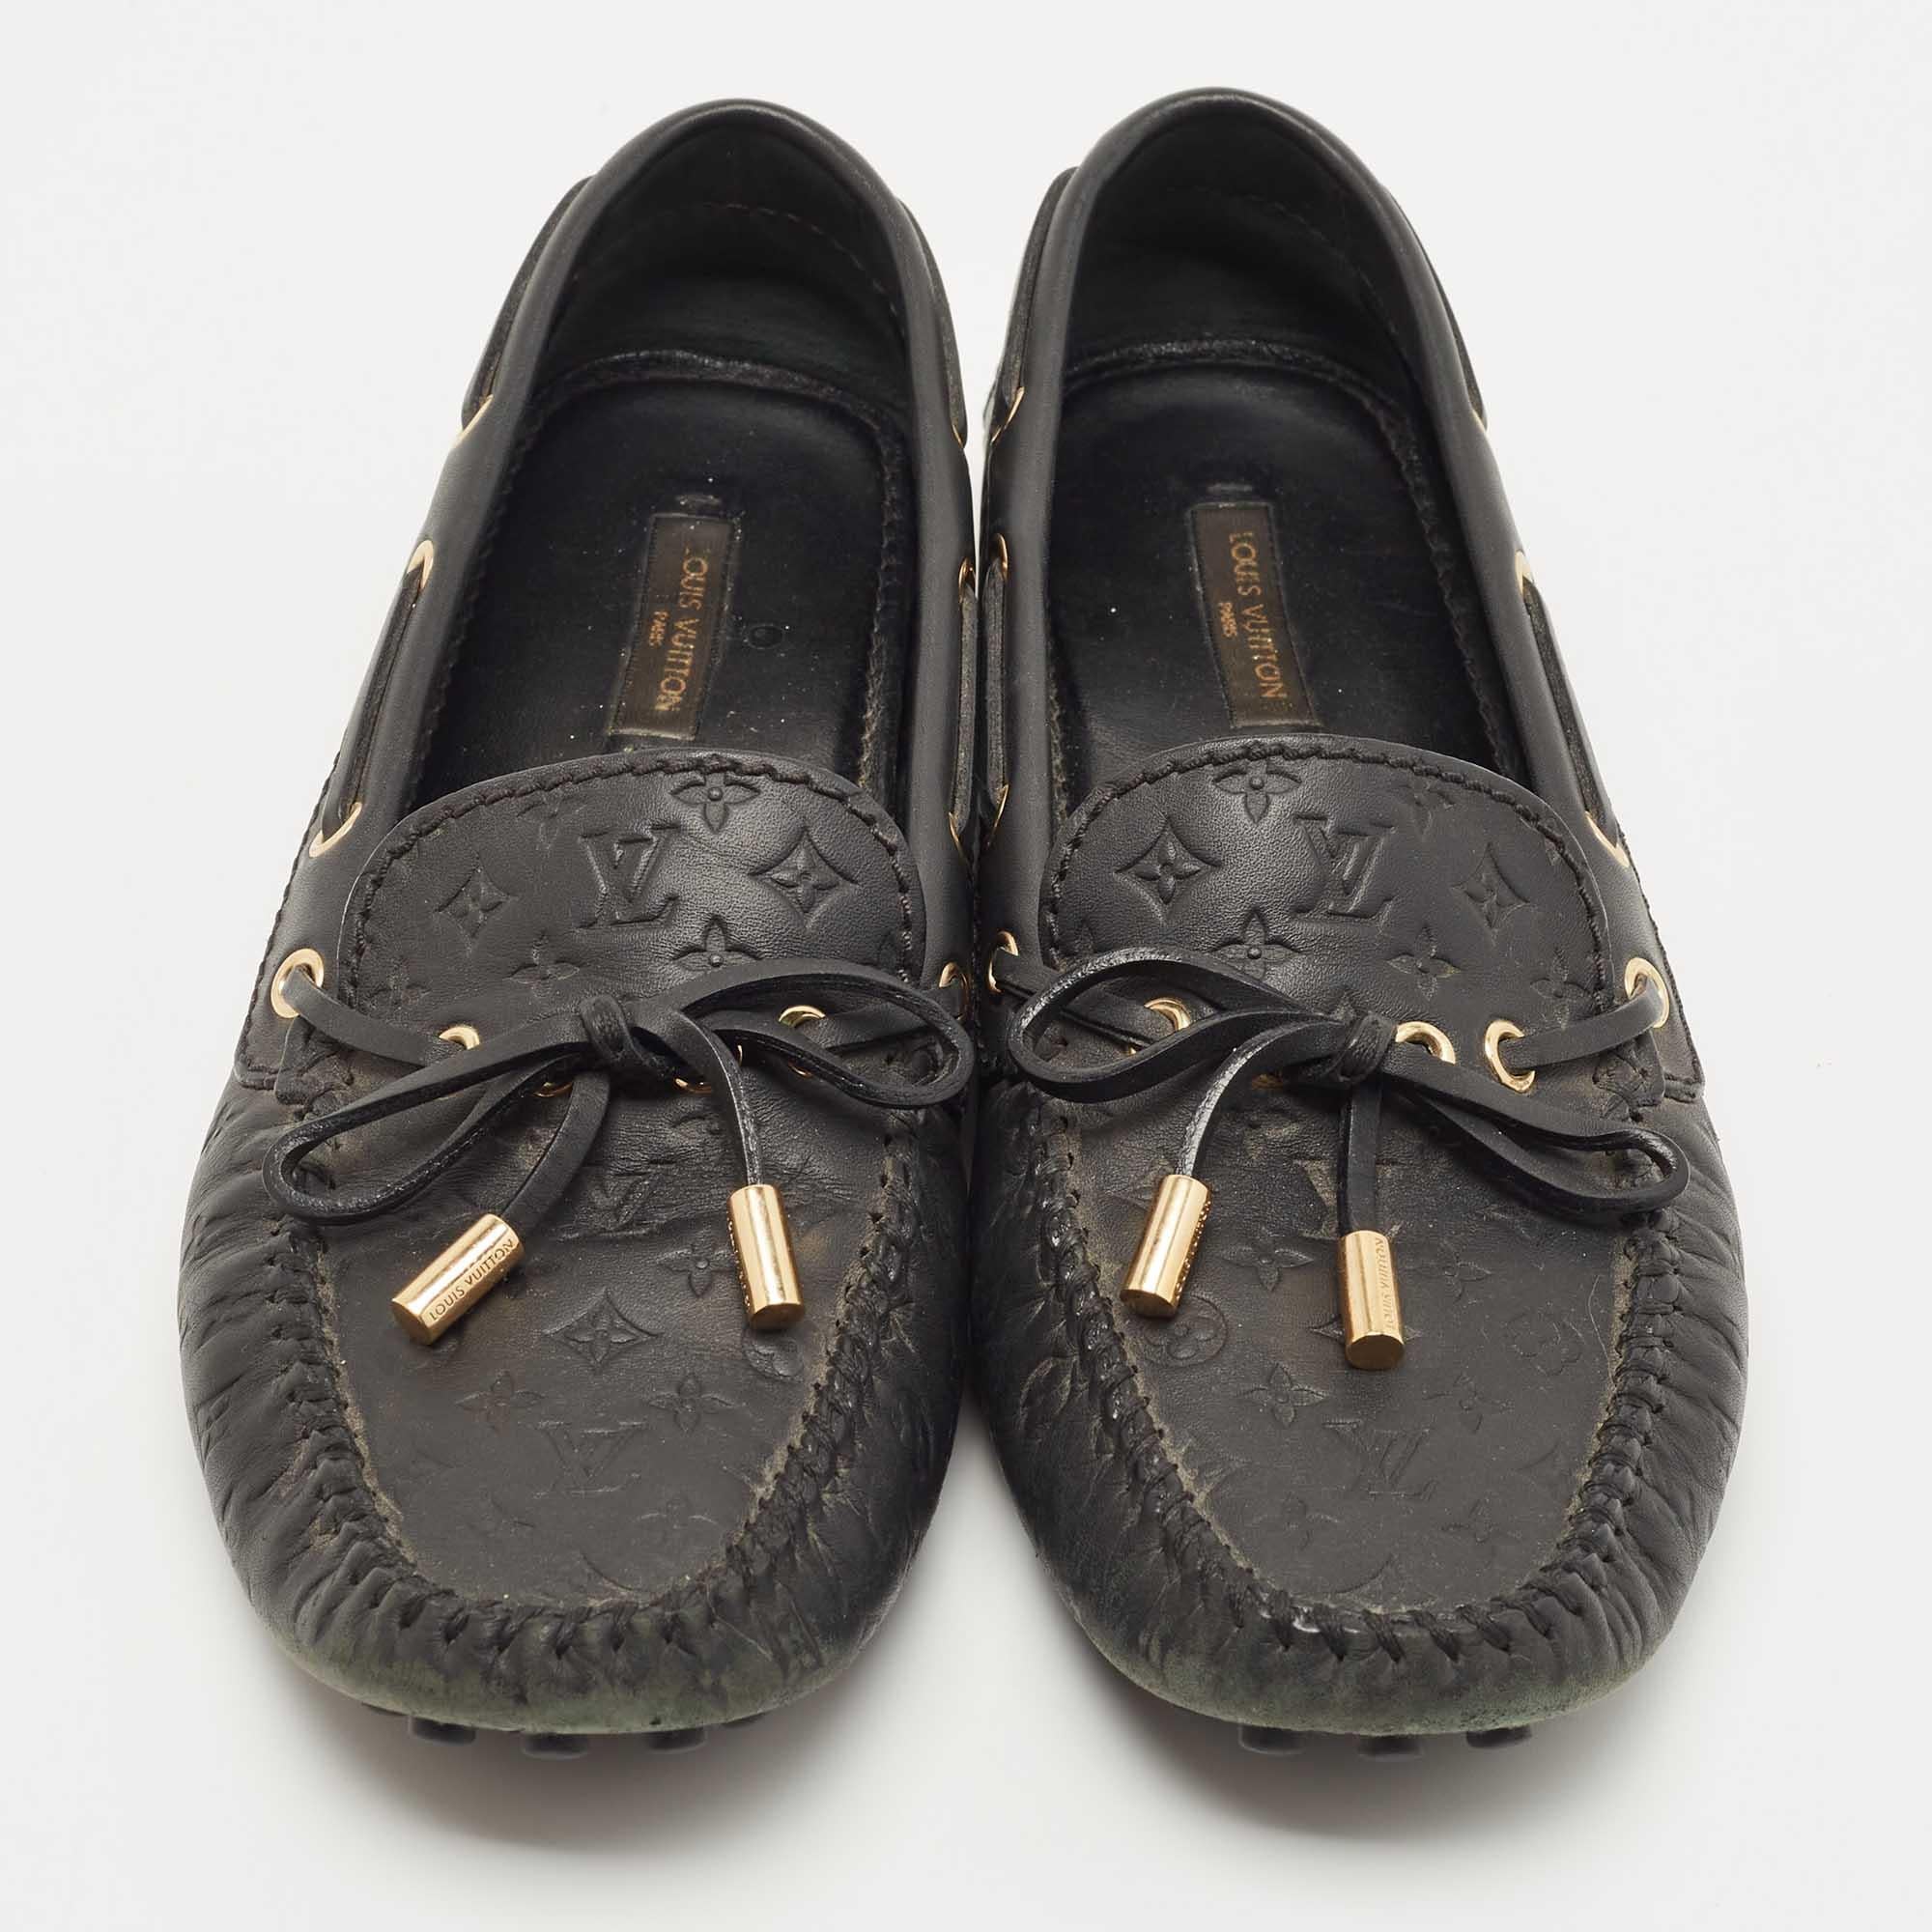 These Gloria loafers by Louis Vuitton are stylish and comfortable. Made from Monogram Empreinte leather, they feature knotted bows with gold-tone eyelets. They come with pebbled rubber soles and counters. The insoles are leather lined and carry the